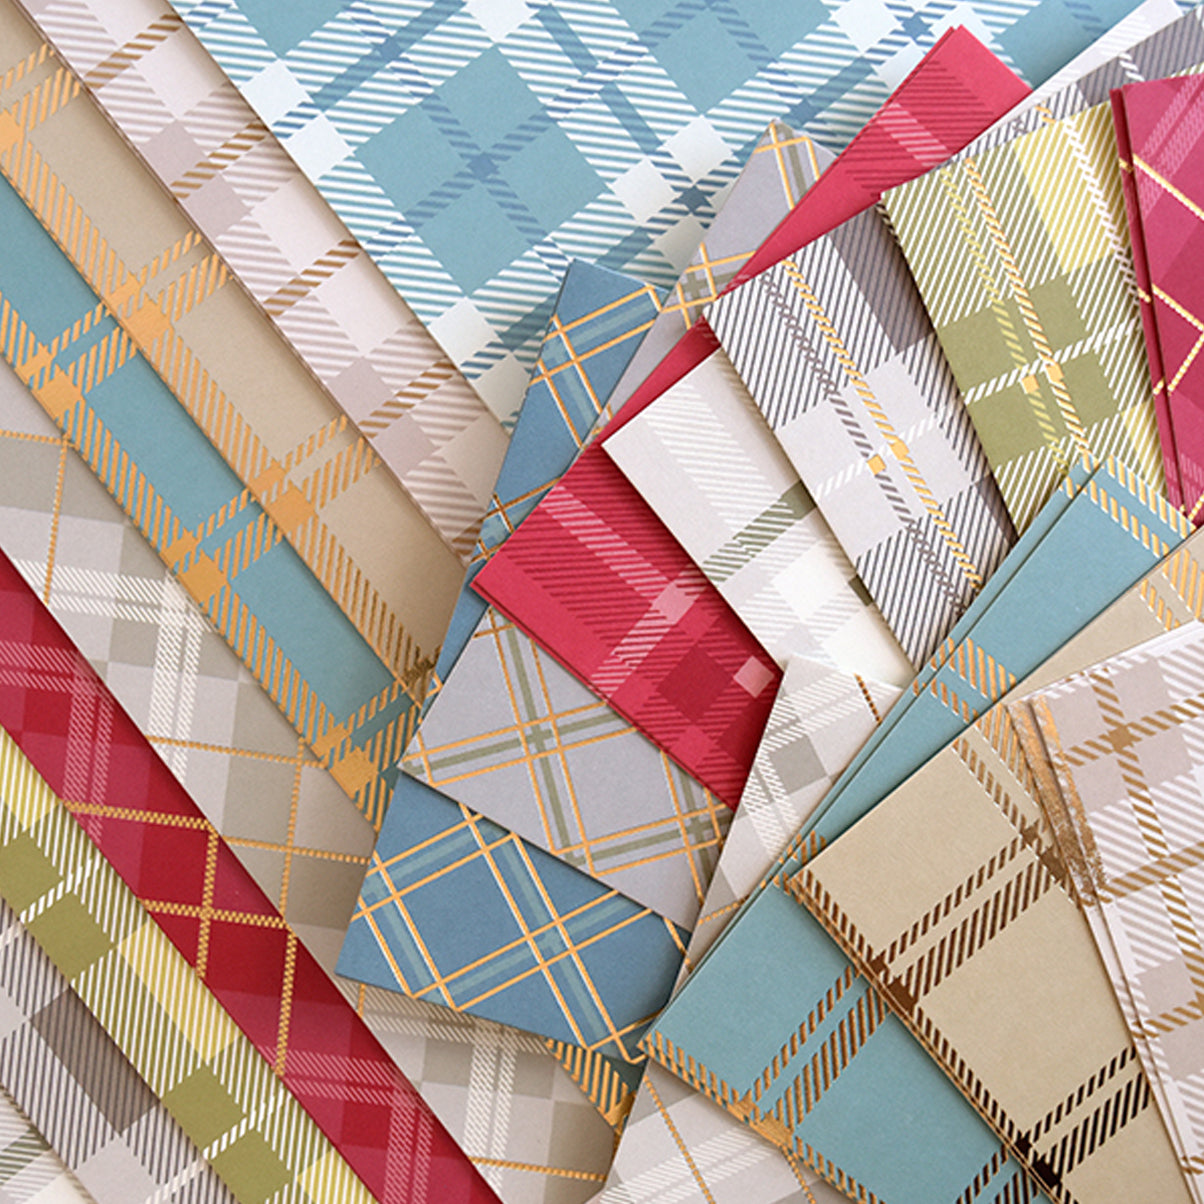 A stack of Fall Plaid Cardstock papers by Anna Griffin.